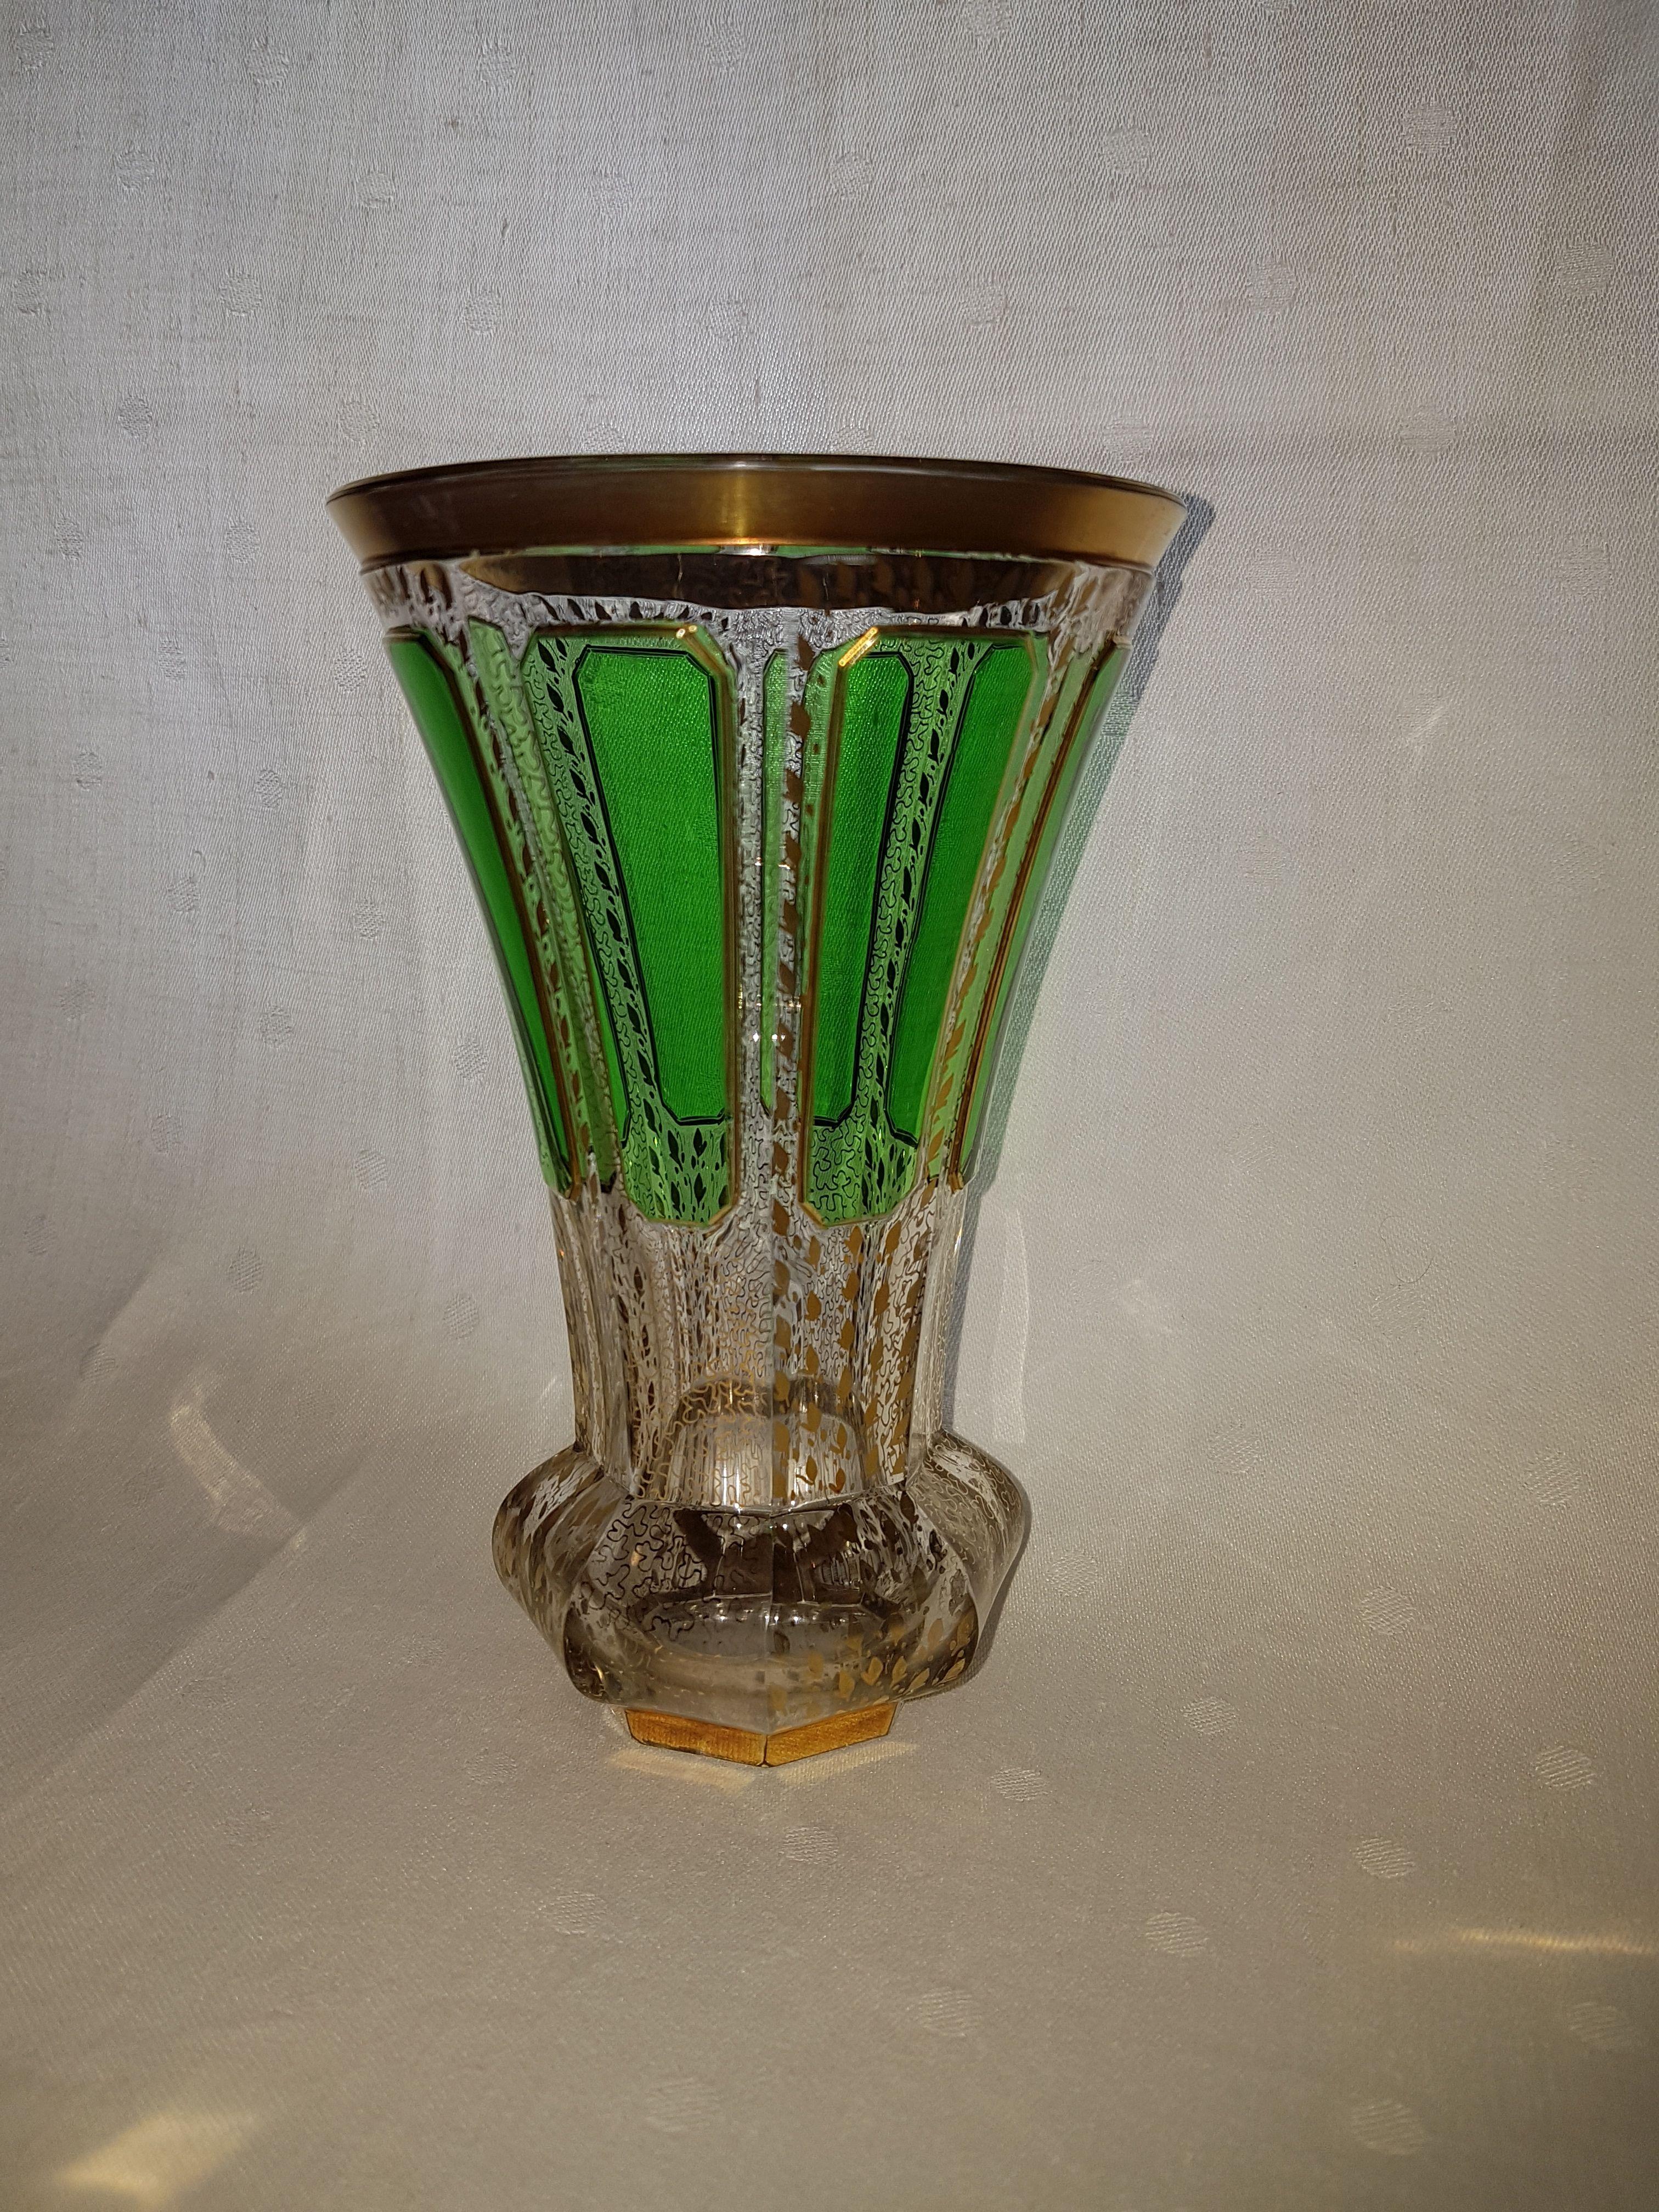 Women's or Men's Jugendstil Stained Glass Vase with Gold Applications, Austria, circa 1910